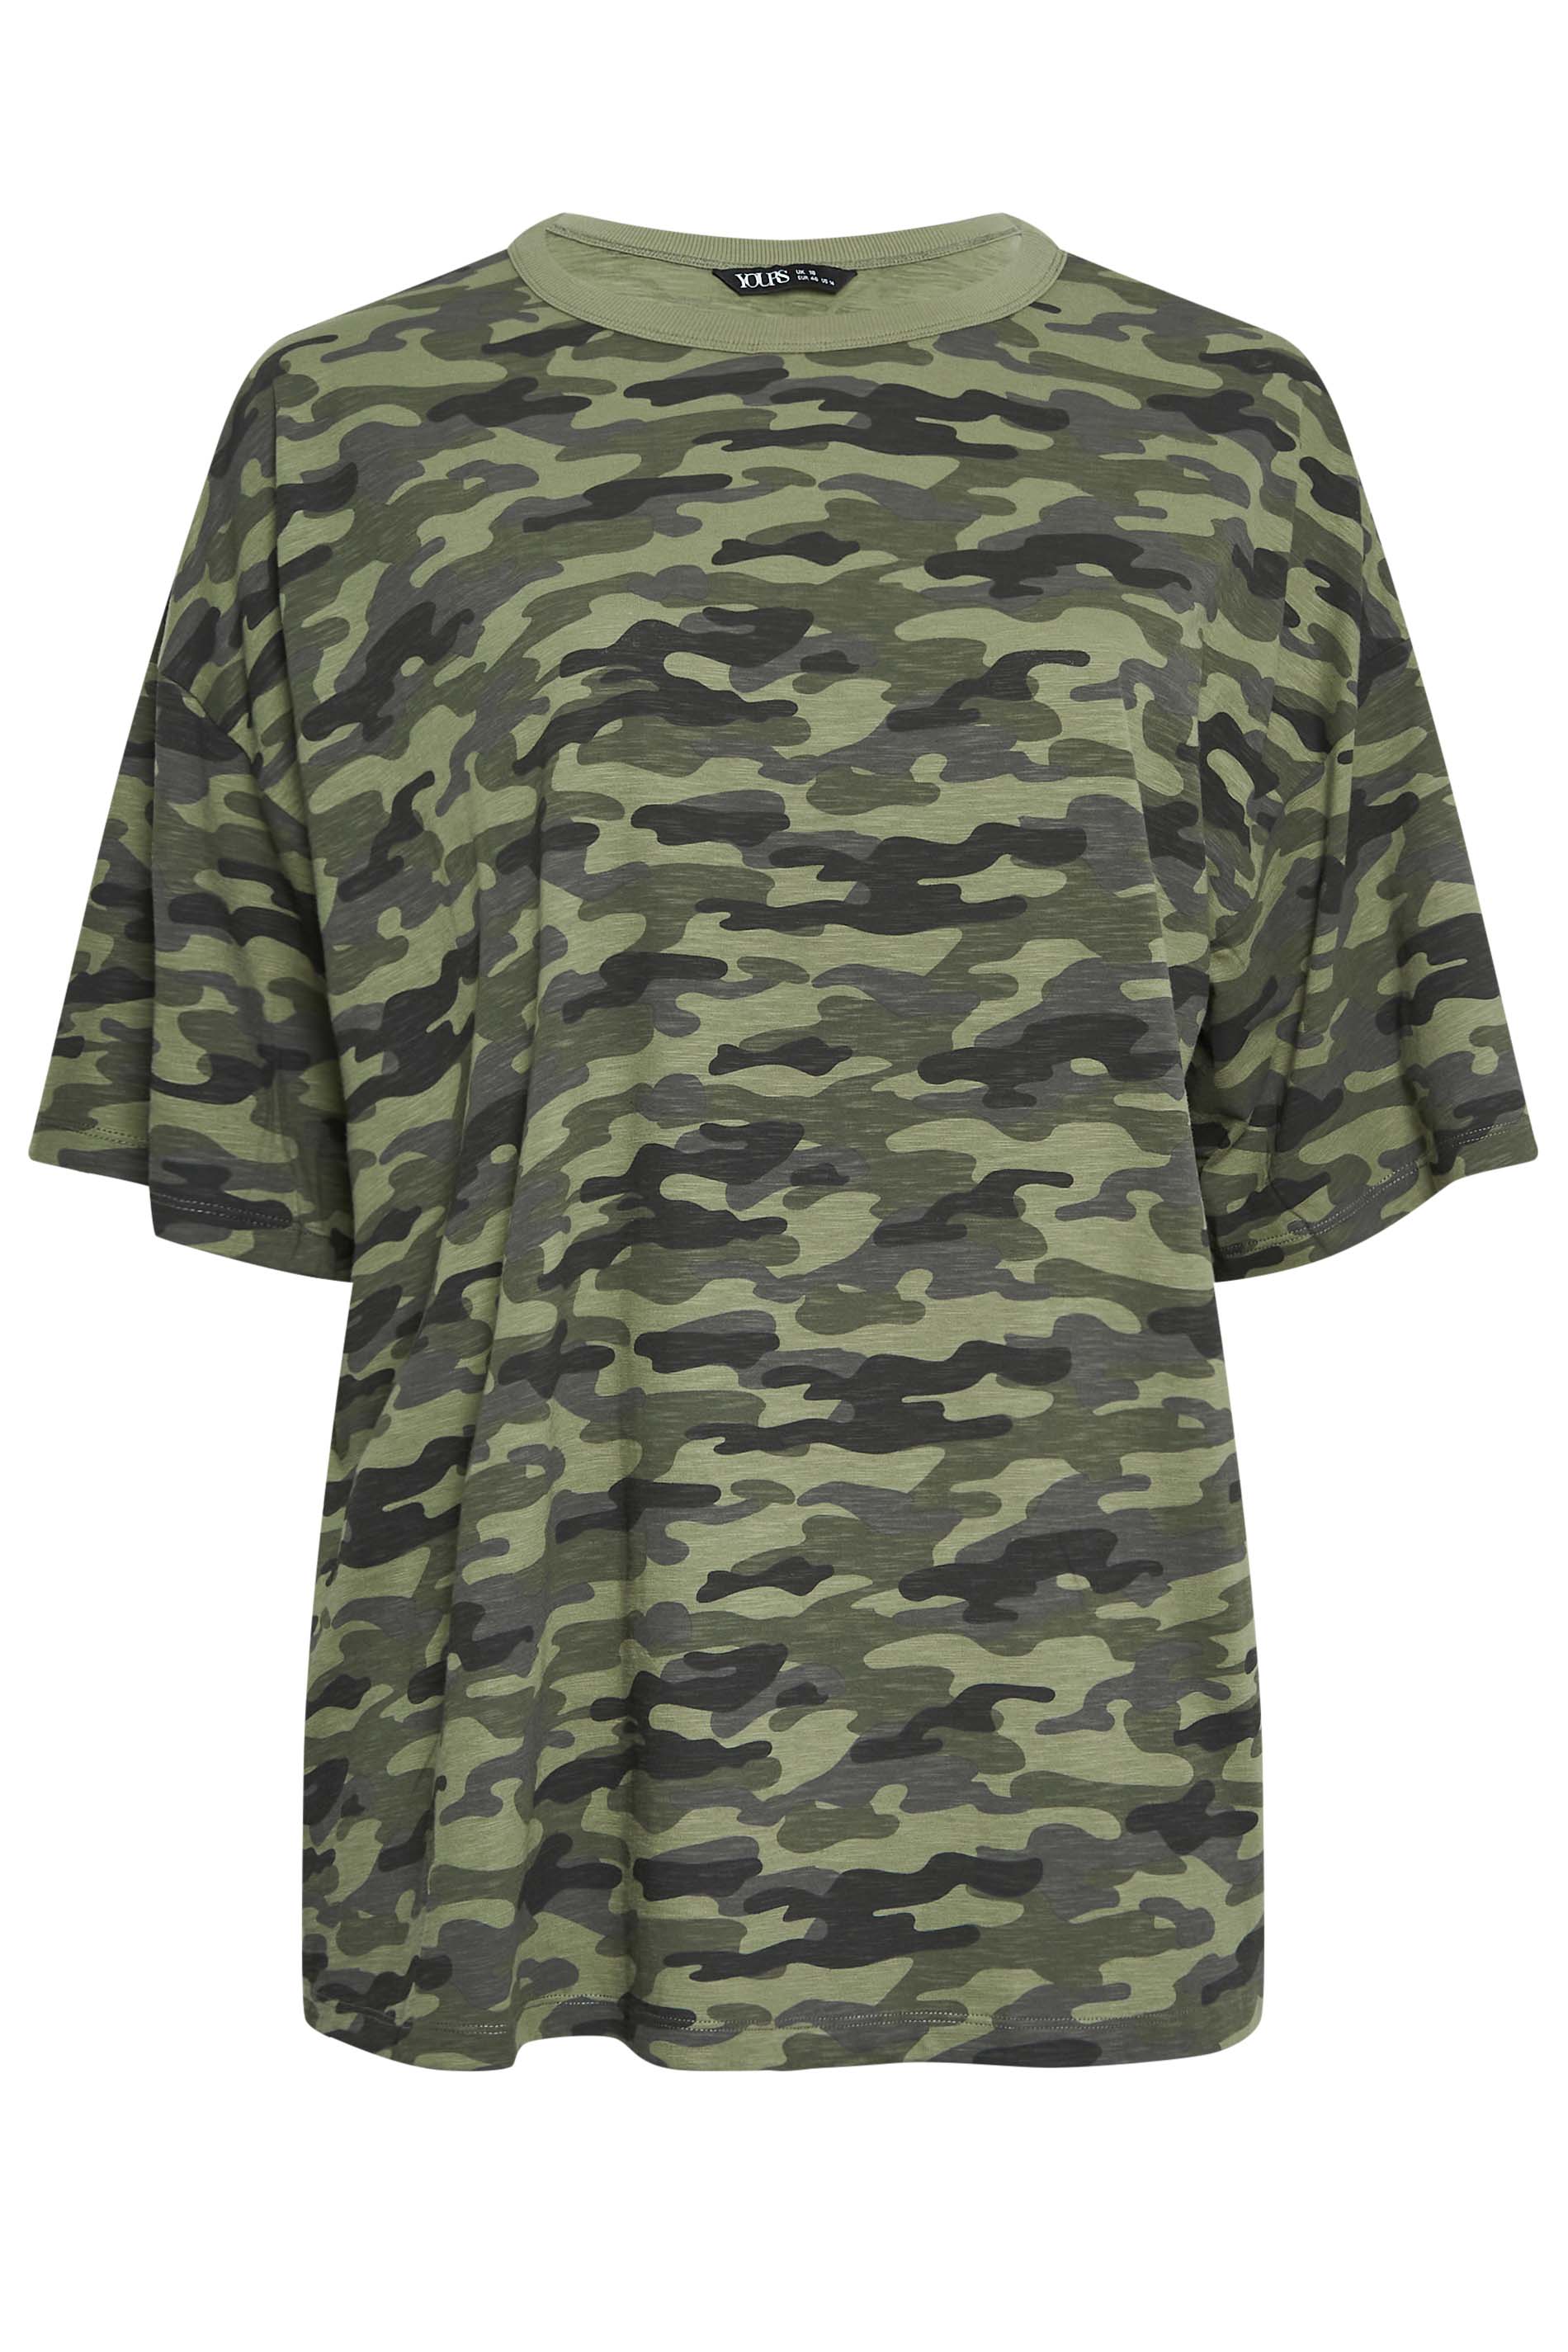 Plus Size Yours Curve Green Camo Print Oversized Boxy Tshirt Size 30-32 | Women's Plus Size and Curve Fashion